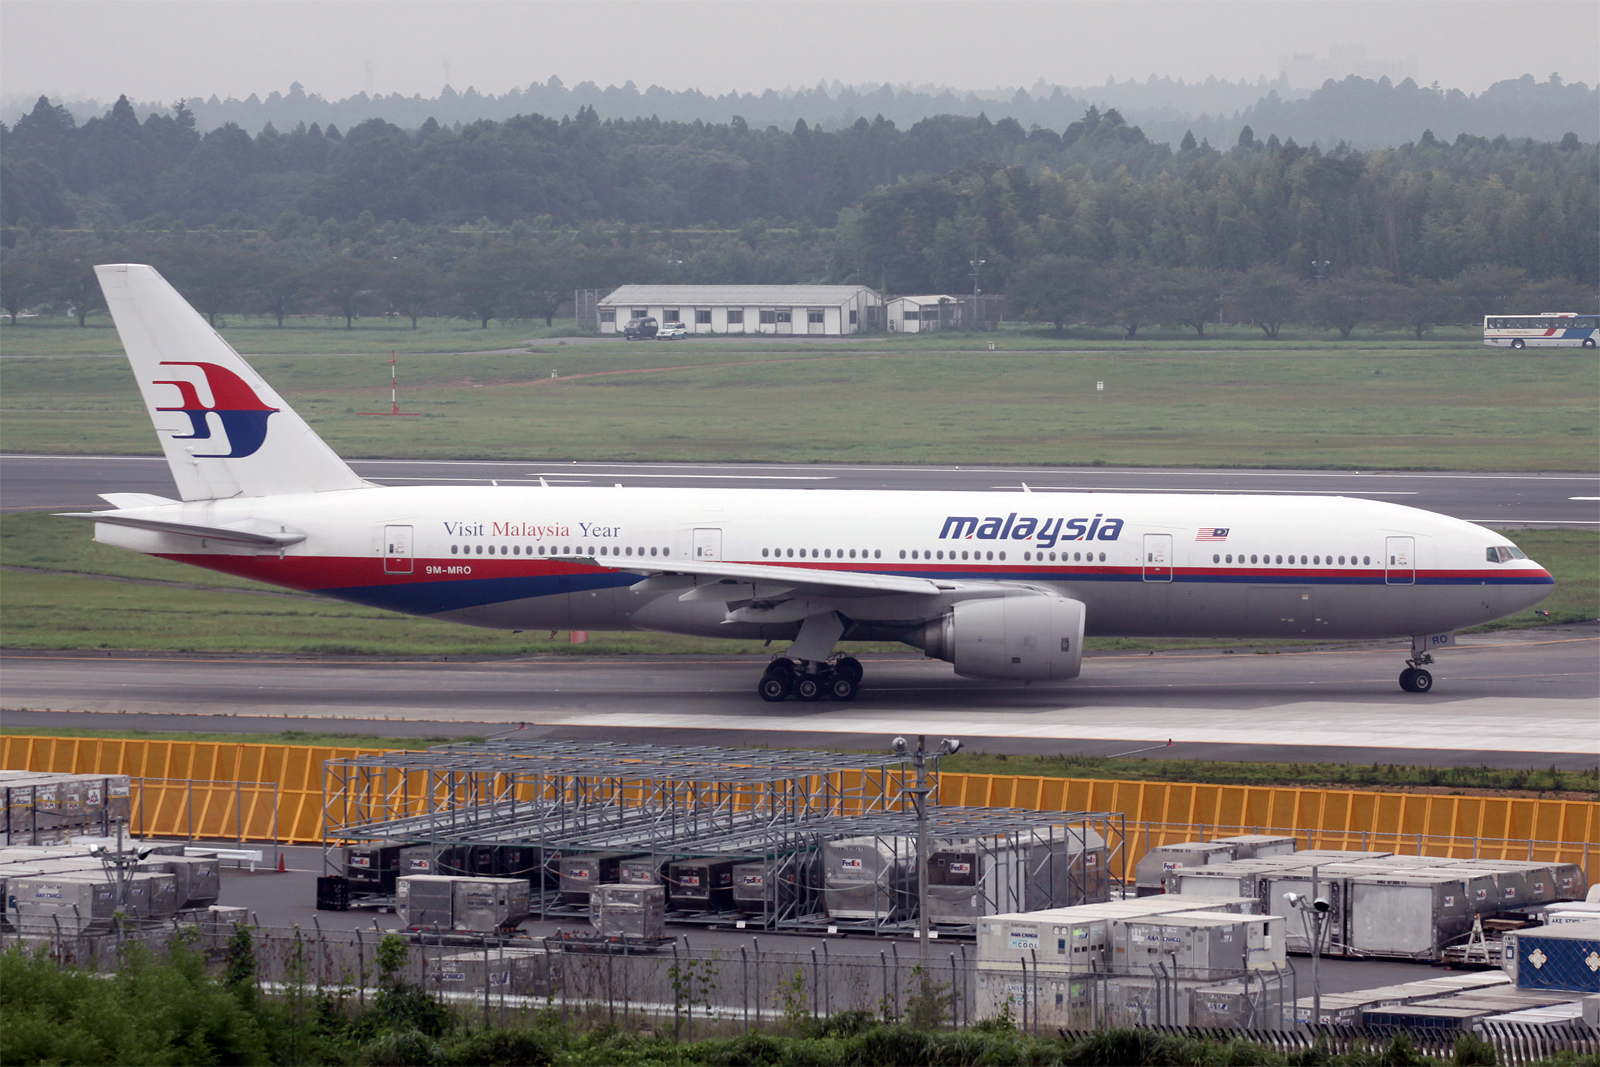 MH370: The Plane That Disappeared - Wikipedia